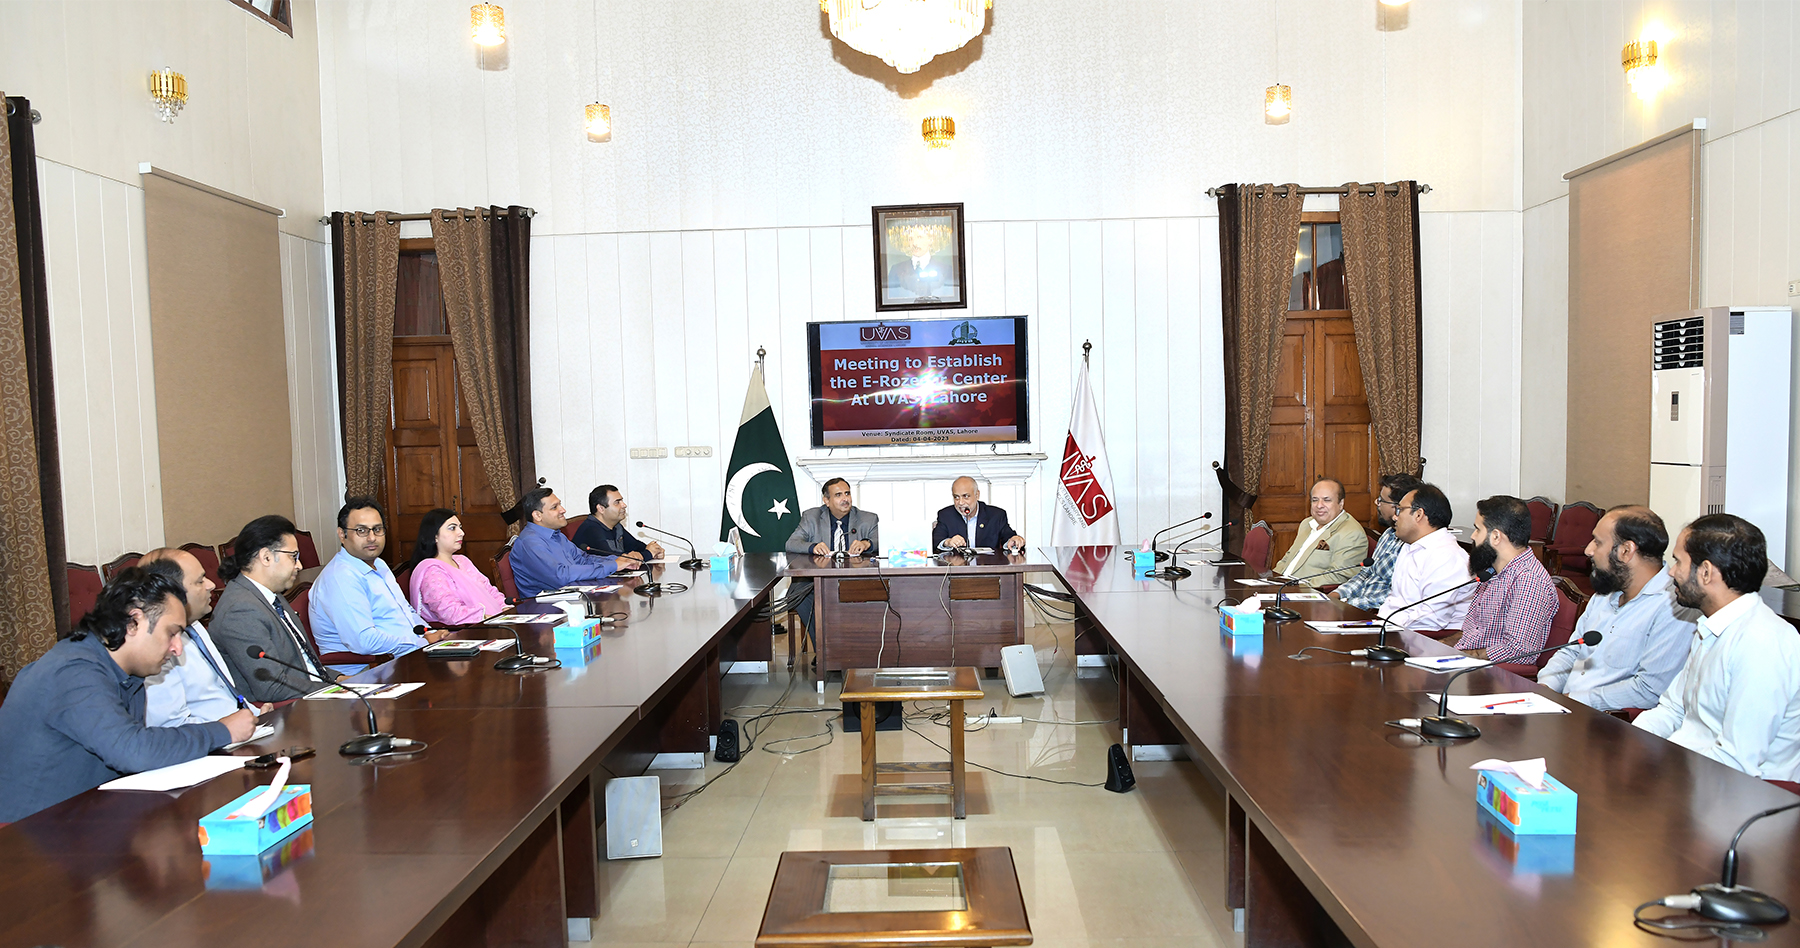 UVAS holds meeting to establish e-Rozgaar Center to equipping students with skills for enabling them to initiates their own businesses